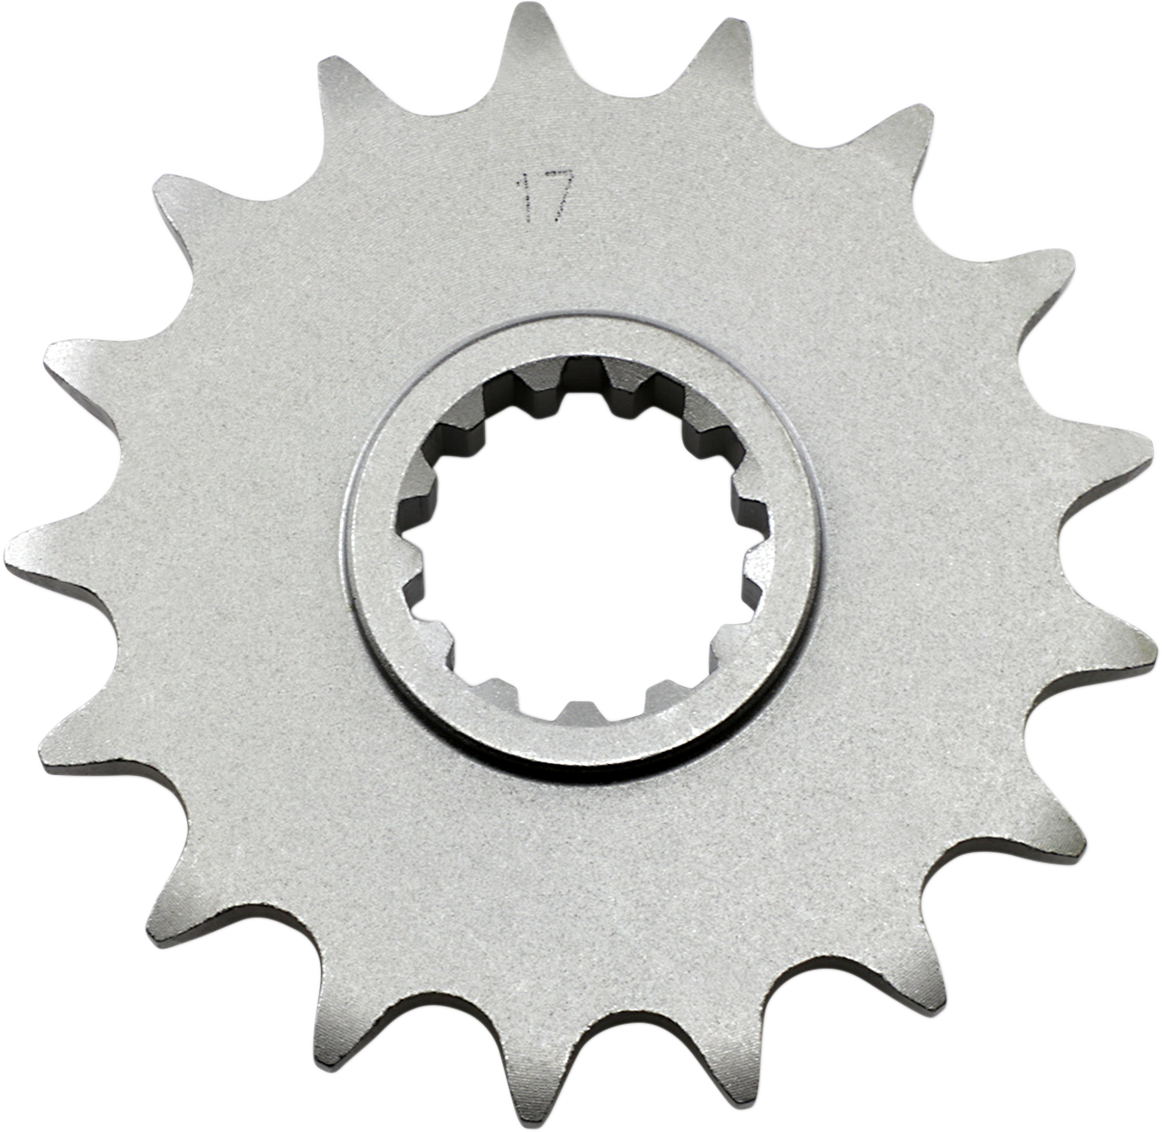 Parts Unlimited Countershaft Sprocket - 17-Tooth 4xv-17460-52017